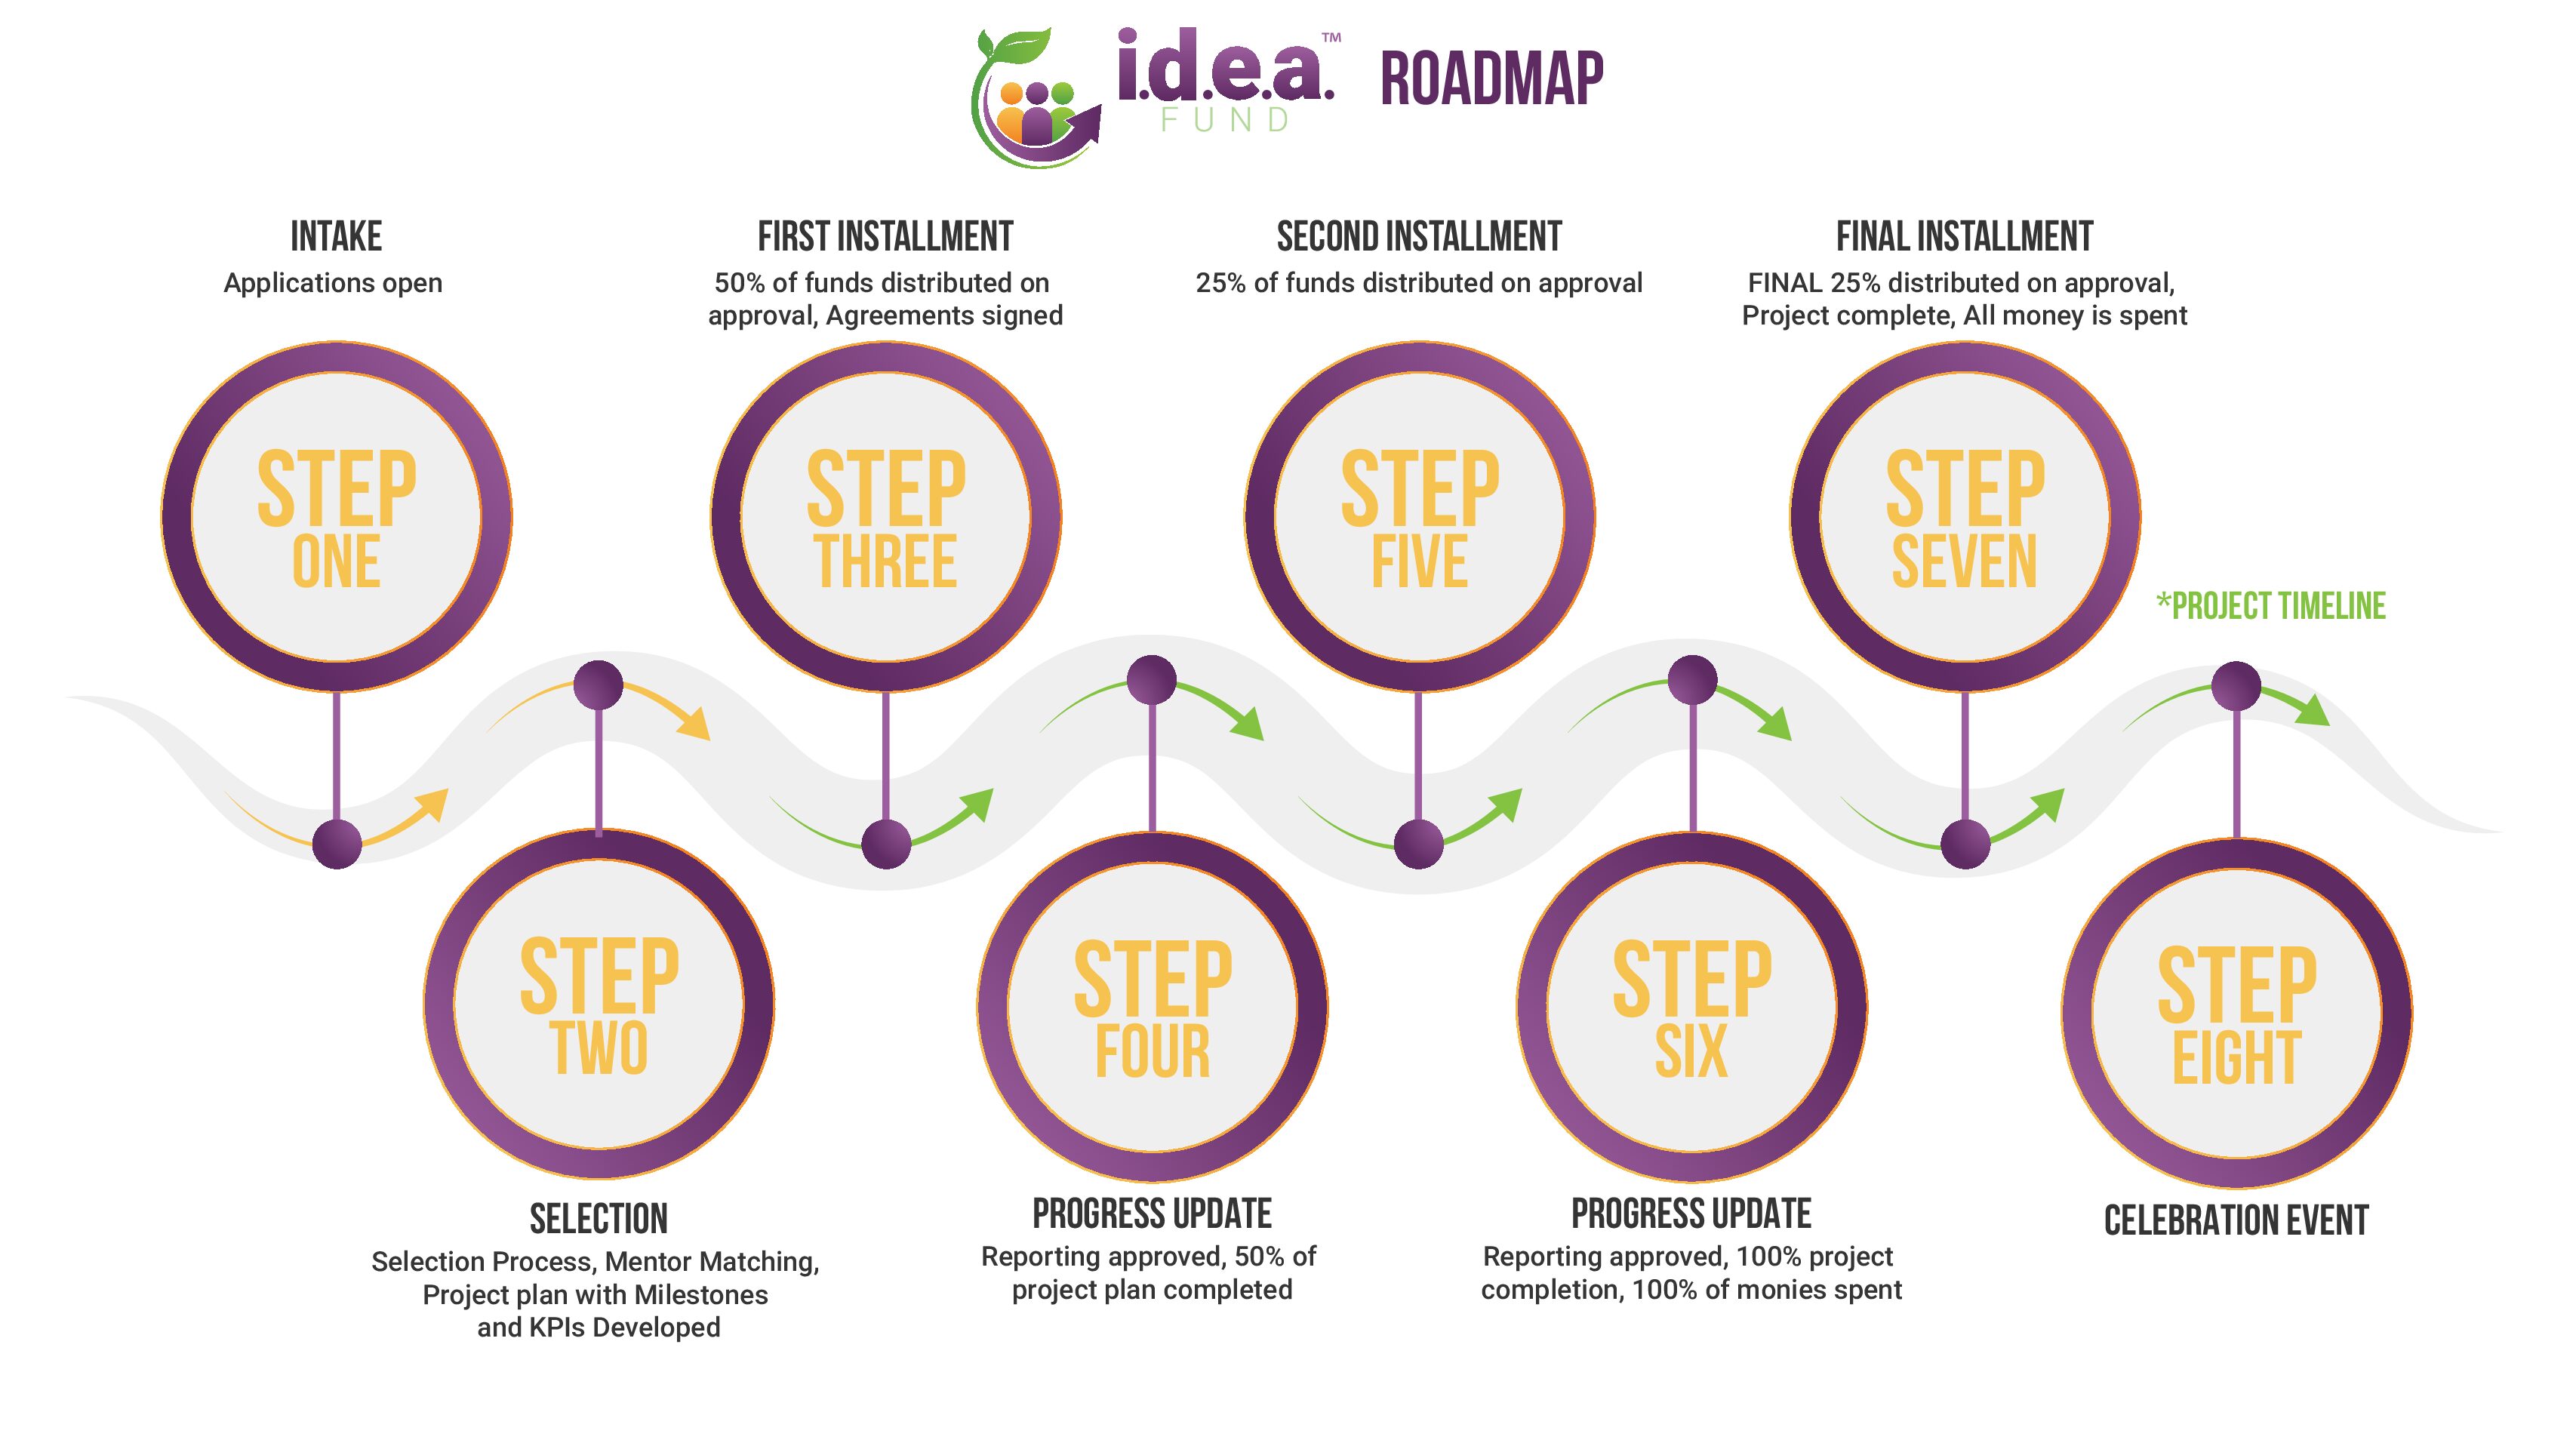 idea Fund Roadmap Image depicting eight steps that companies will engage in throughout the idea Fund program. These the due diligence phase, the first installment, first progress update, second installment, second progress update, final installment, and celebration event.